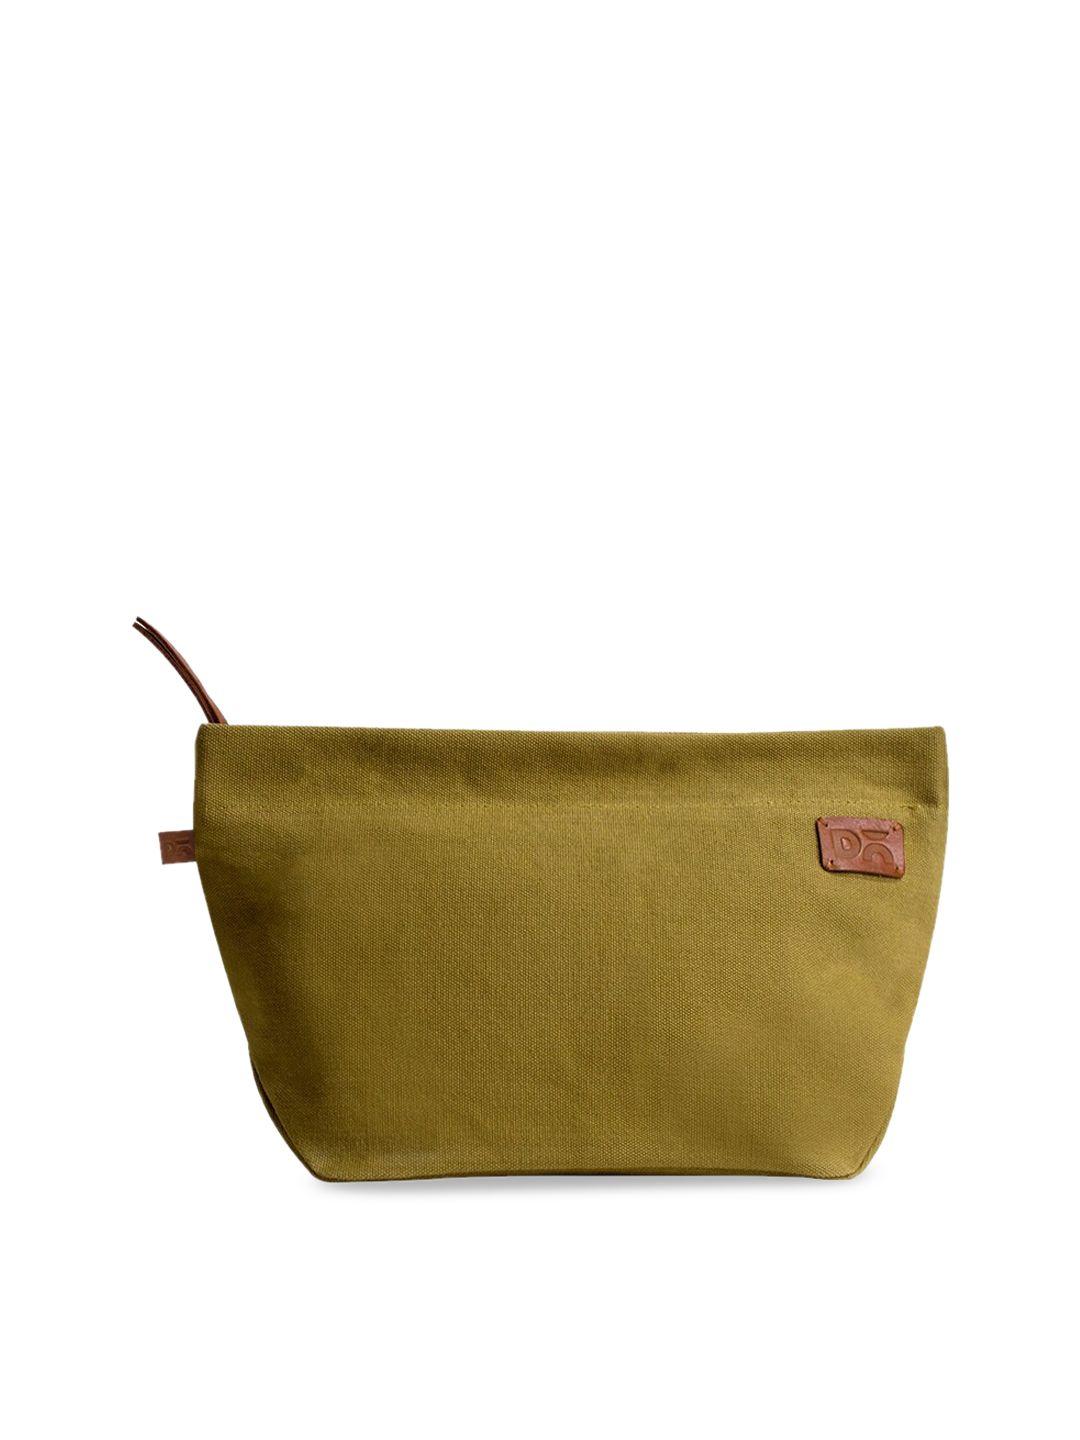 dailyobjects unisex olive green pouch